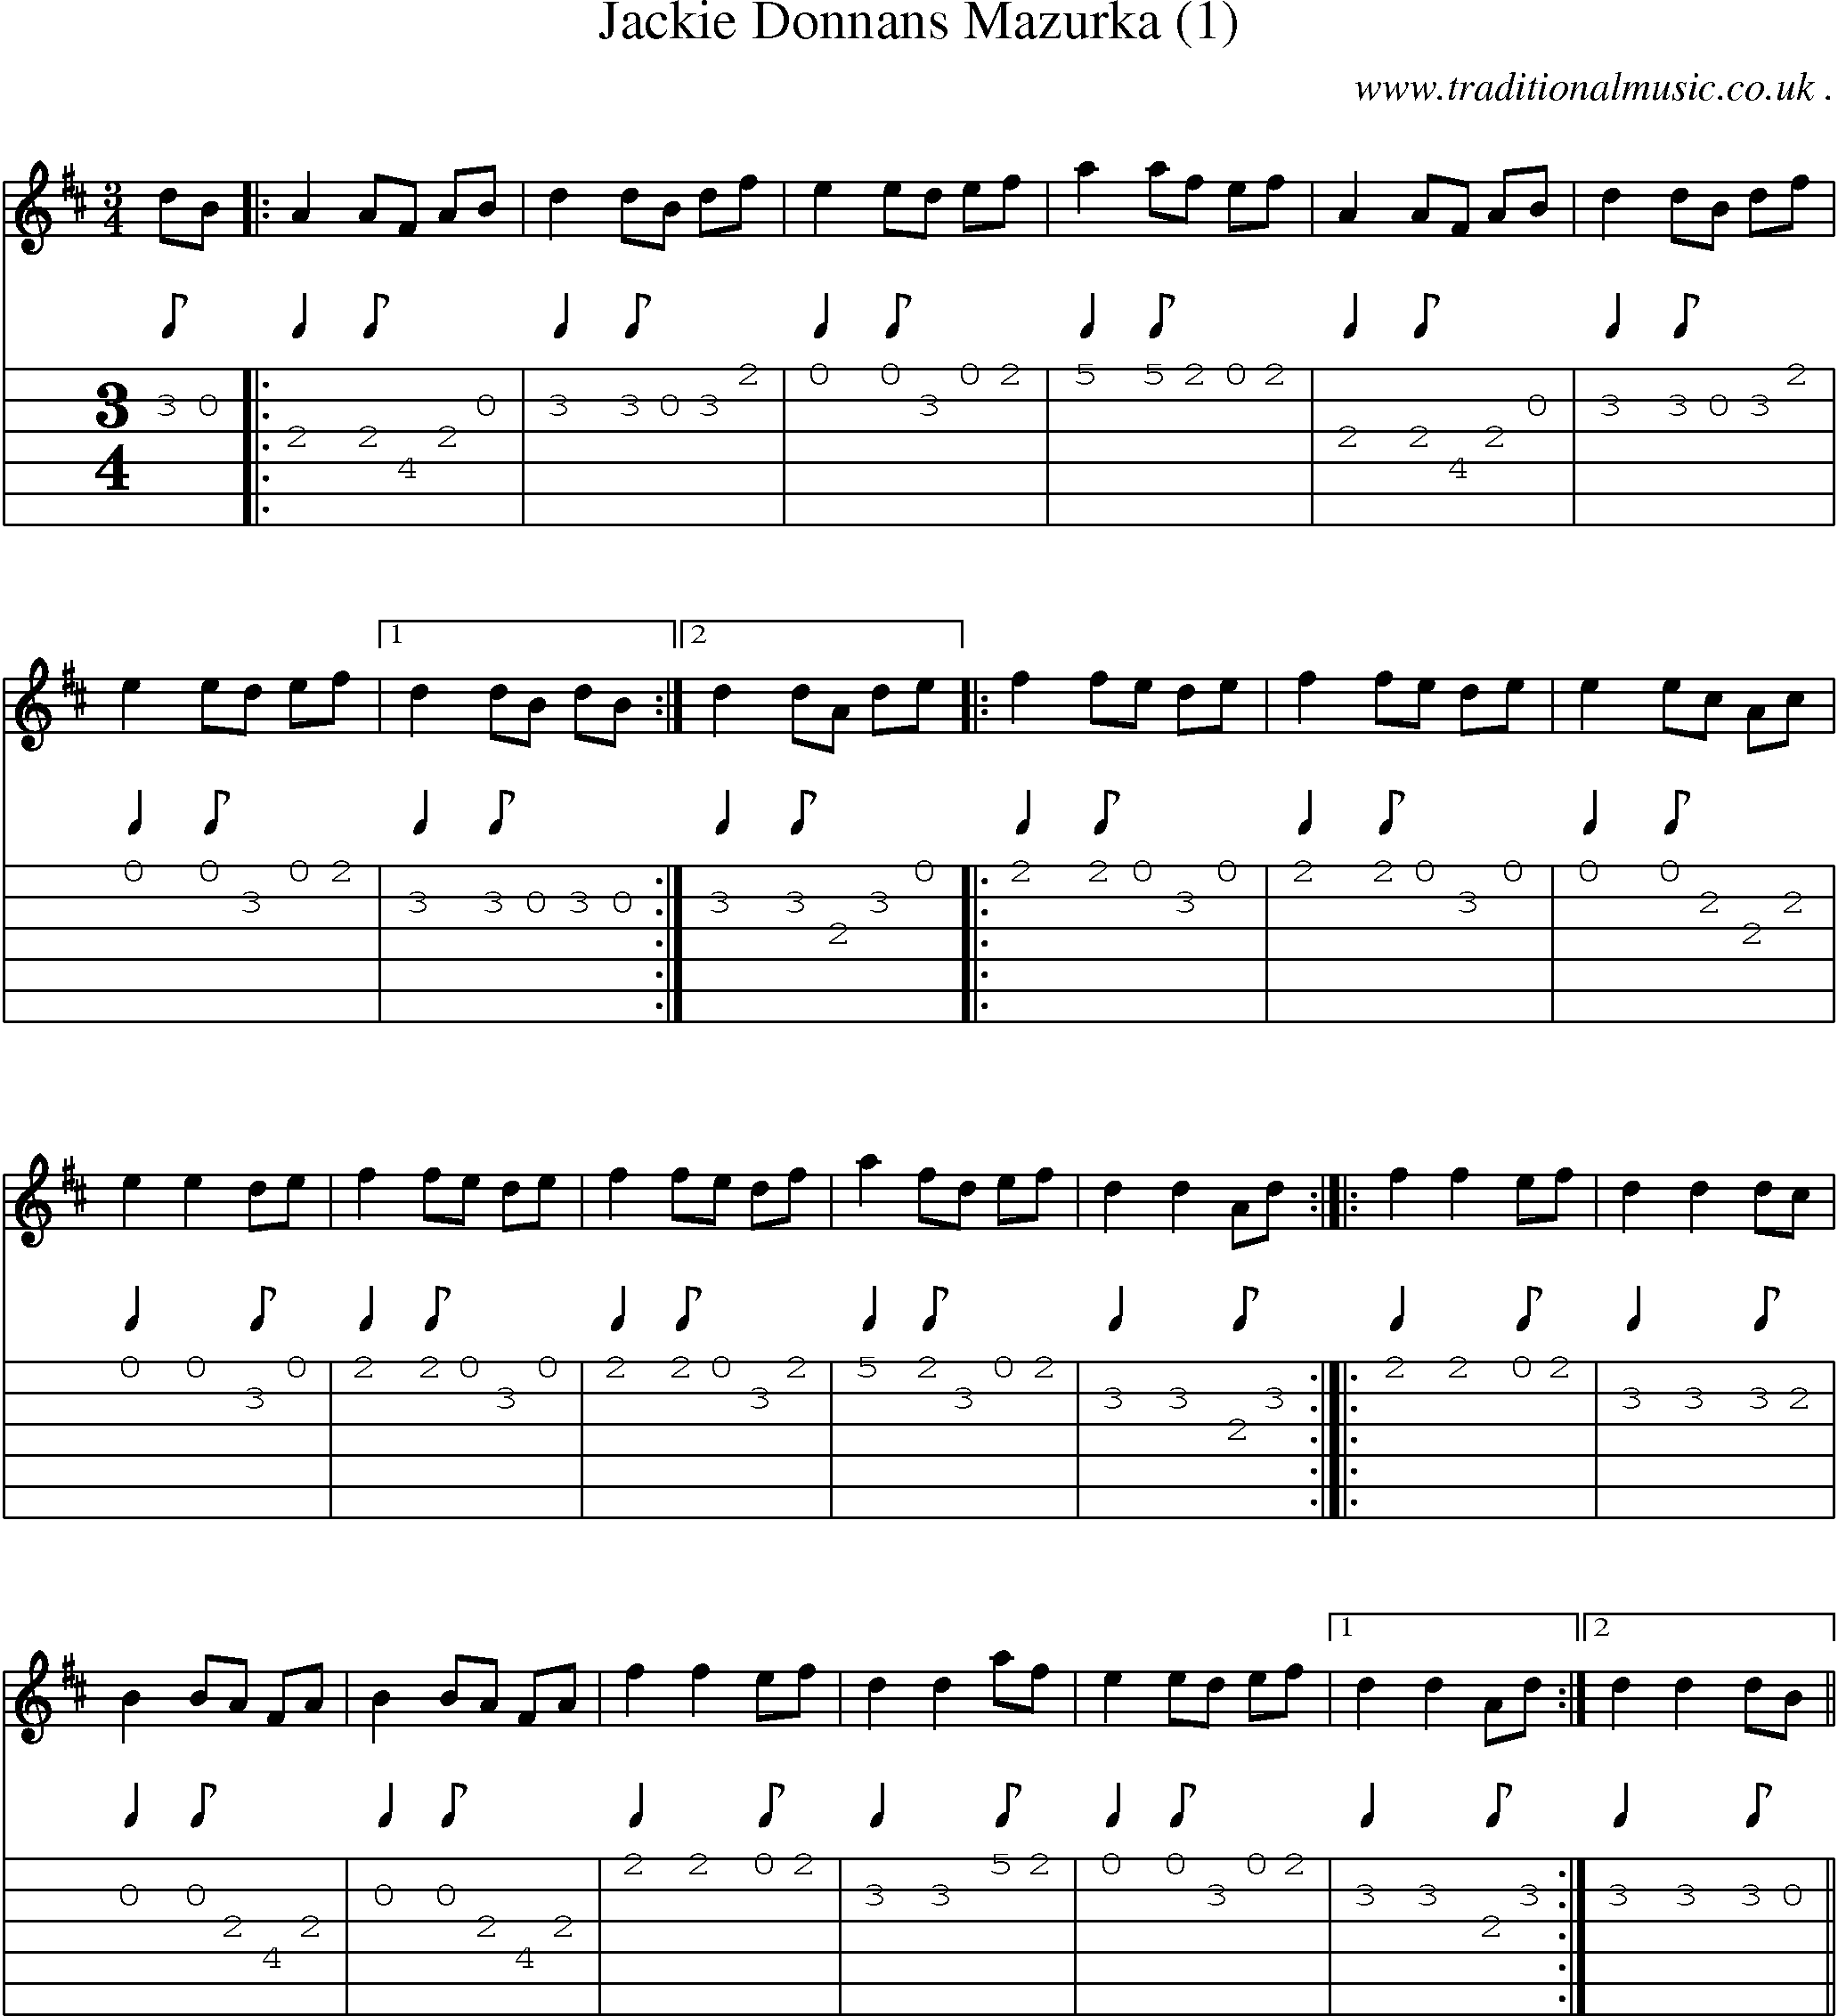 Sheet-Music and Guitar Tabs for Jackie Donnans Mazurka (1)